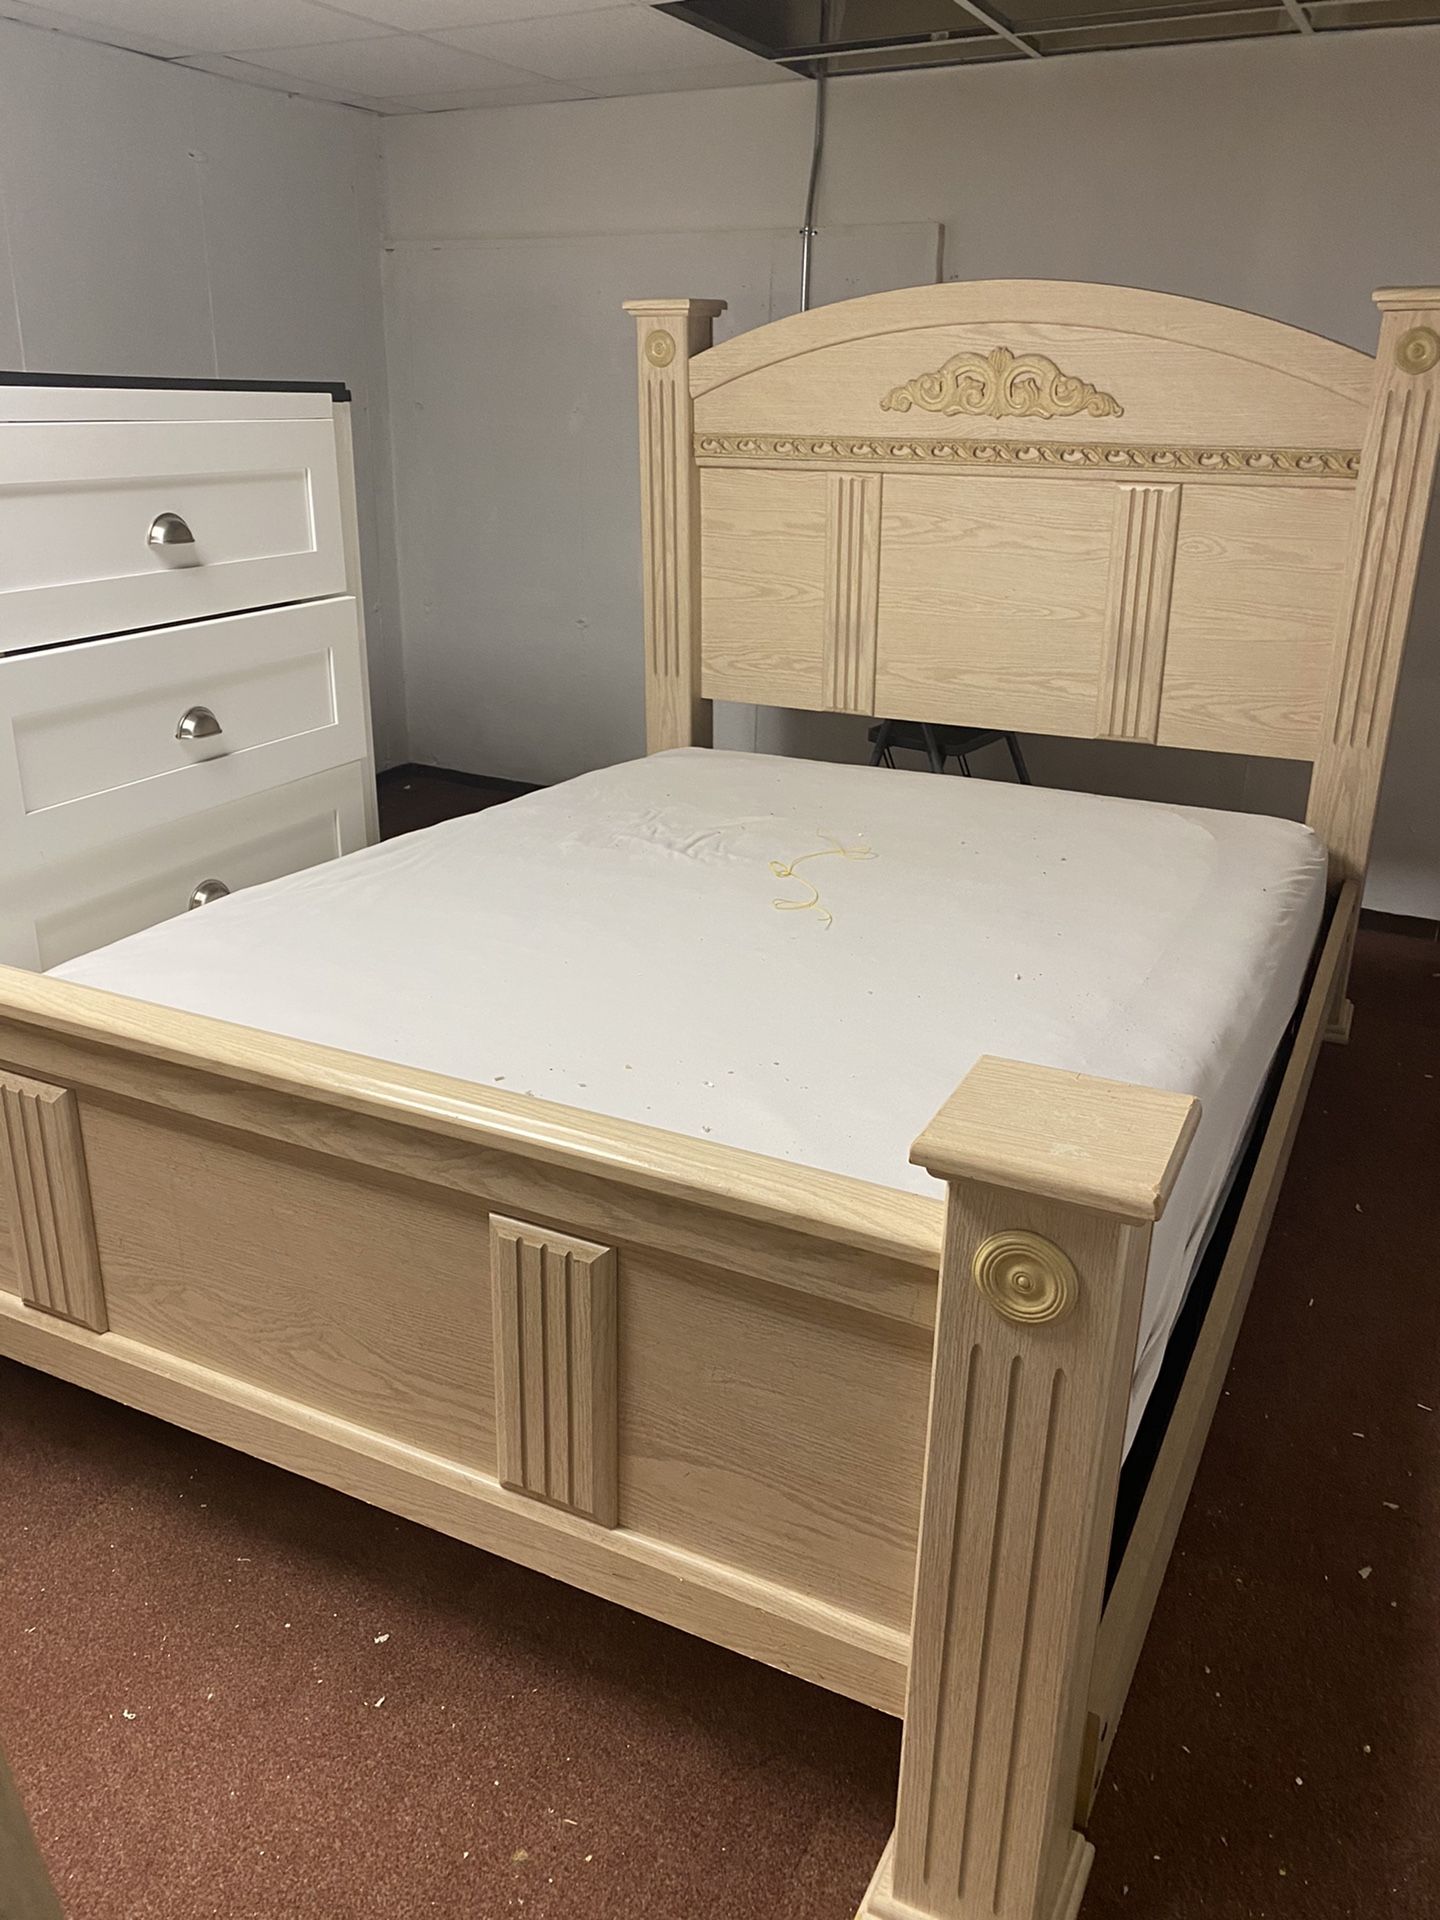 Queen size bad frame and bed